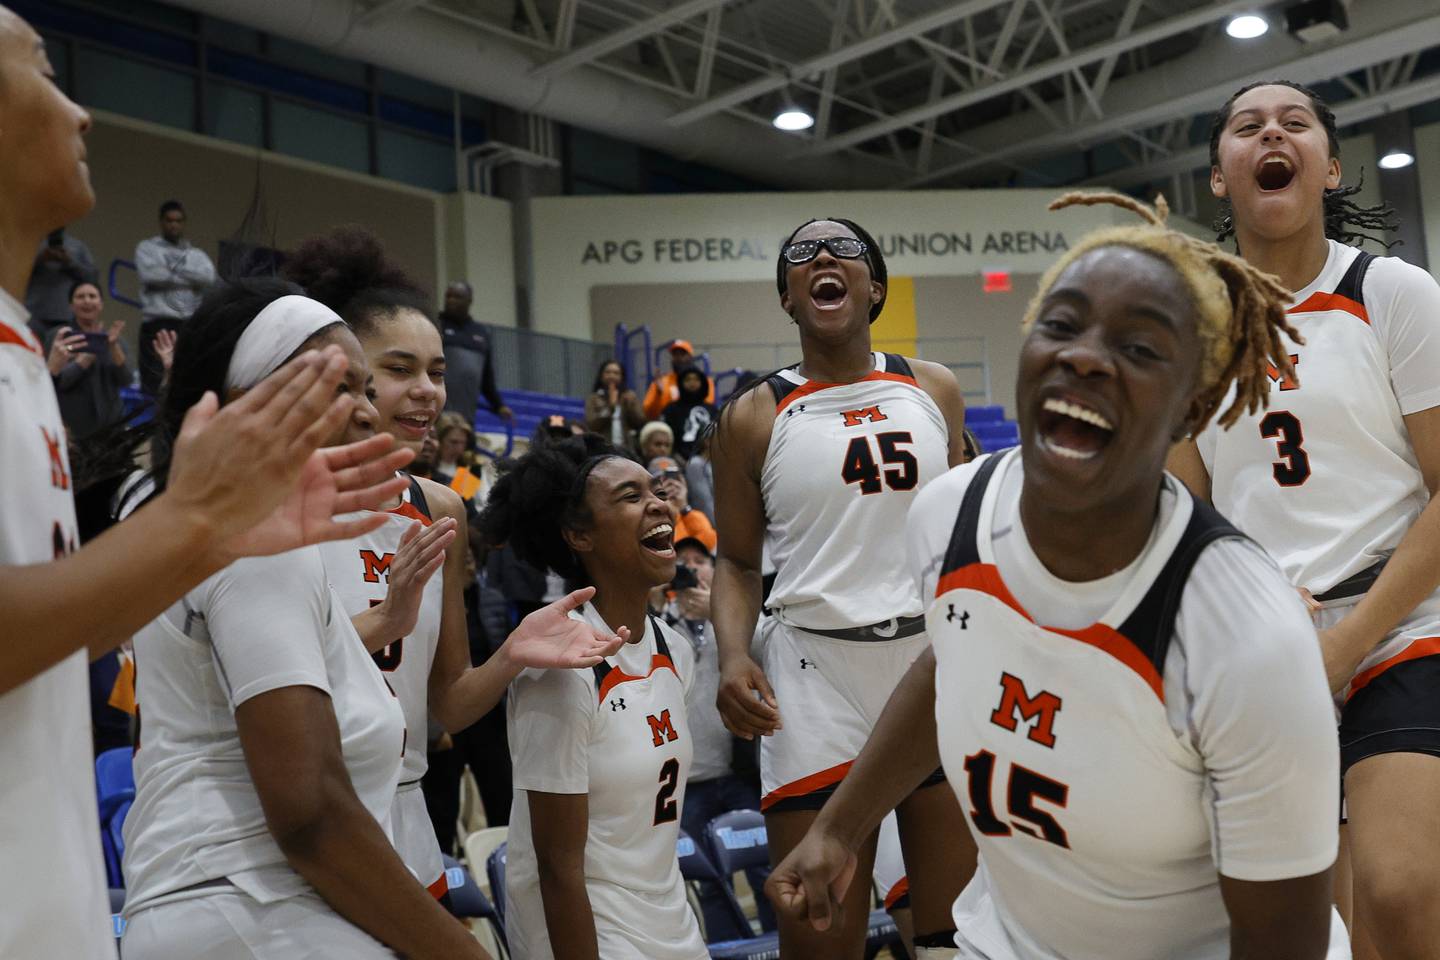 McDonogh players react in celebration following the IAAM A Girls Championship game in Bel Air, Md., on Monday, February 20, 2023. McDonogh defeated St. Frances 50-47 to win the championship.